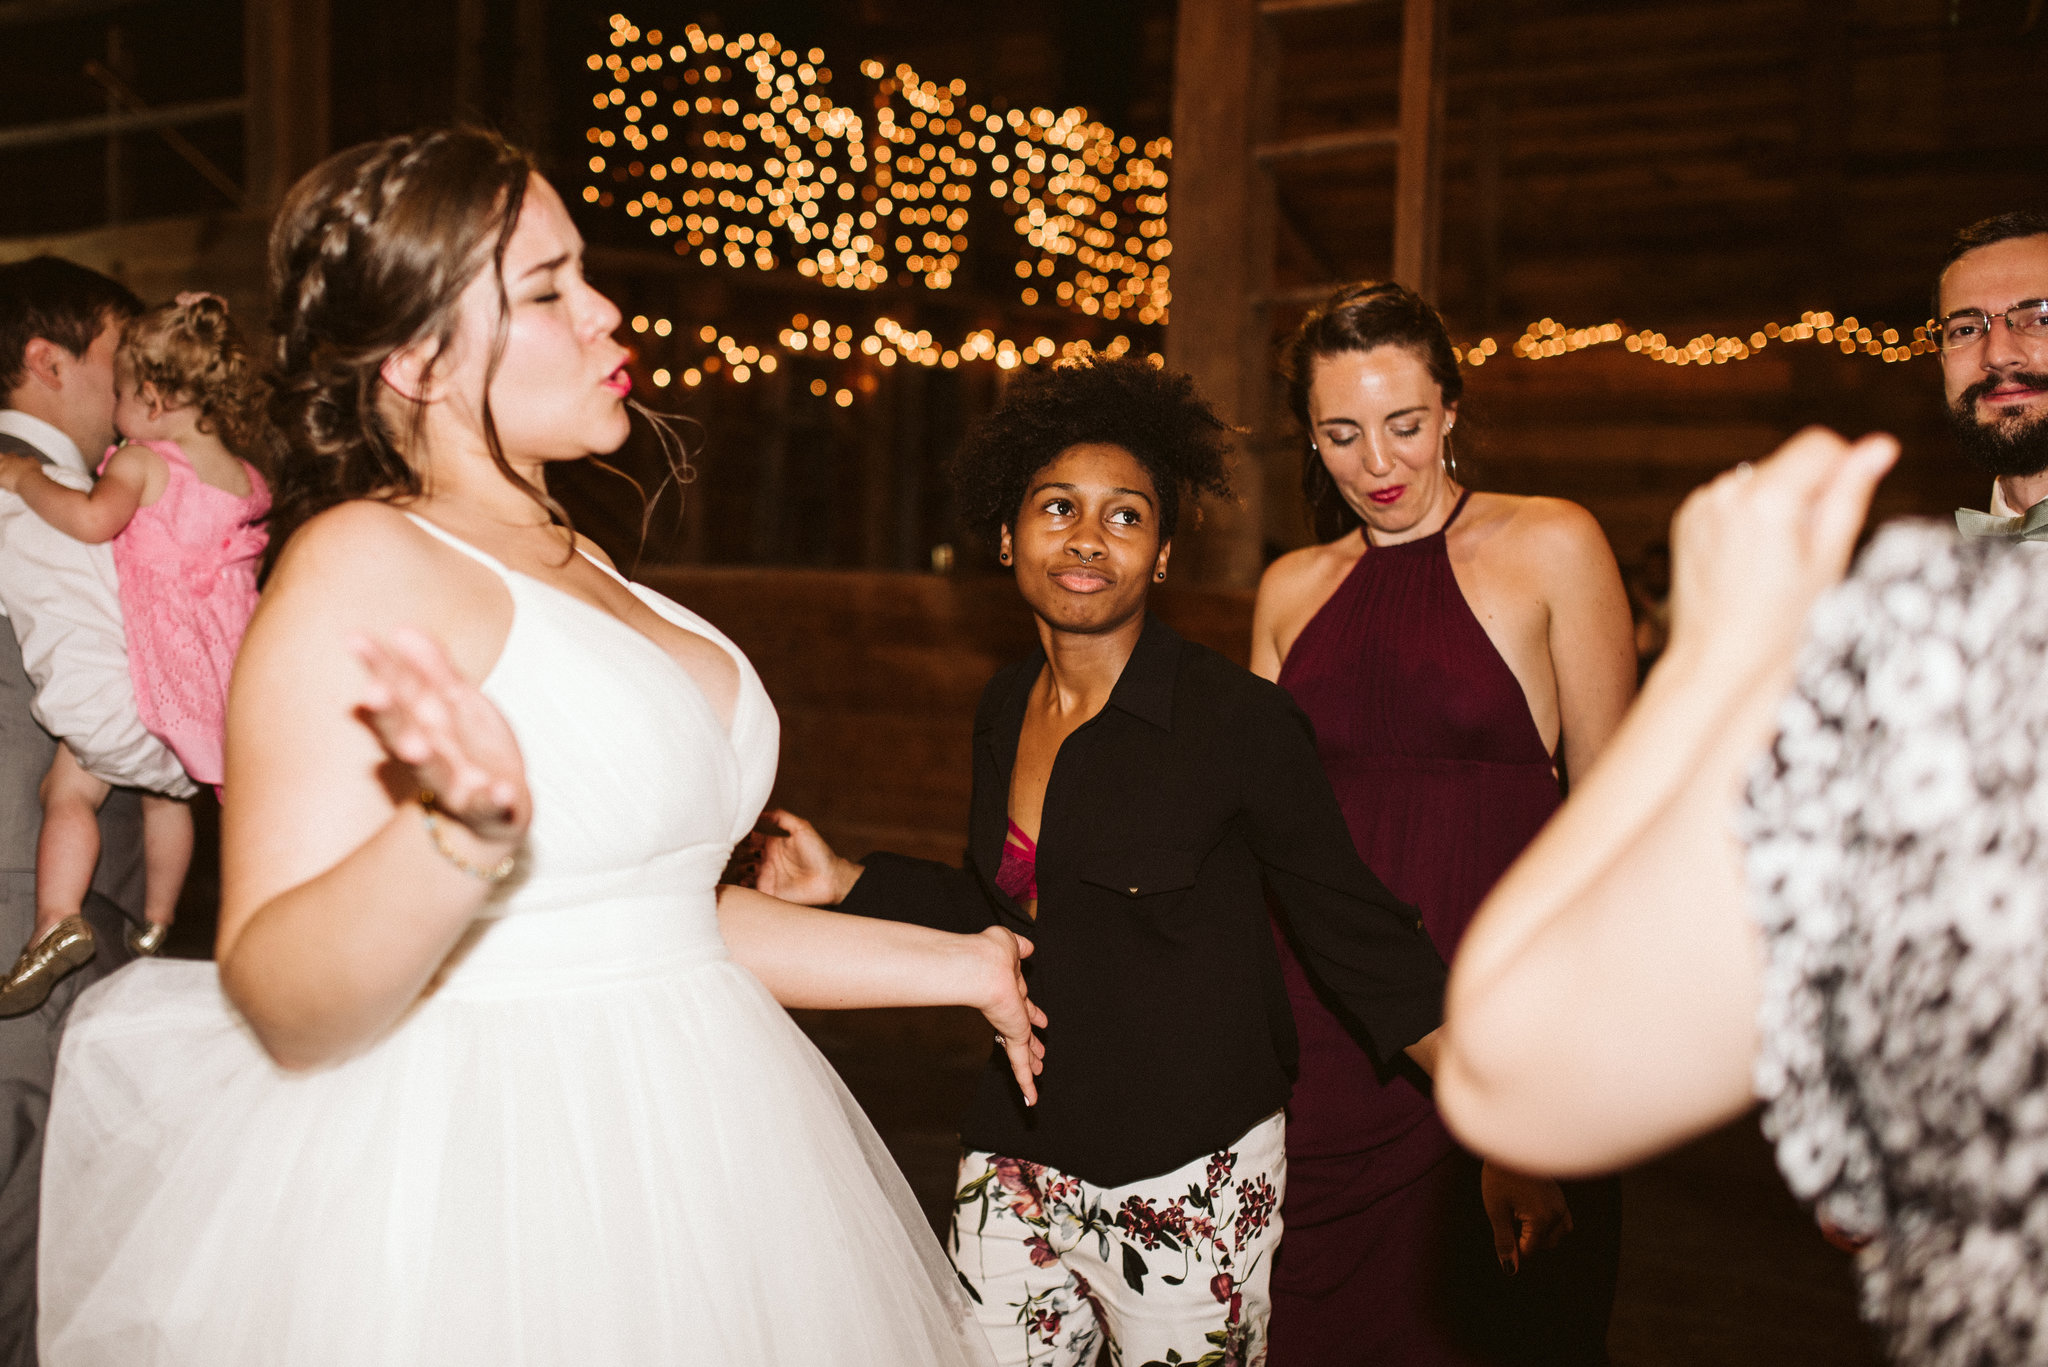 Rocklands Farm, Maryland, Intimate Wedding, Baltimore Wedding Photographer, Sungold Flower Co, Rustic, Romantic, Barn Wedding, Bride Dancing with Friends at Reception